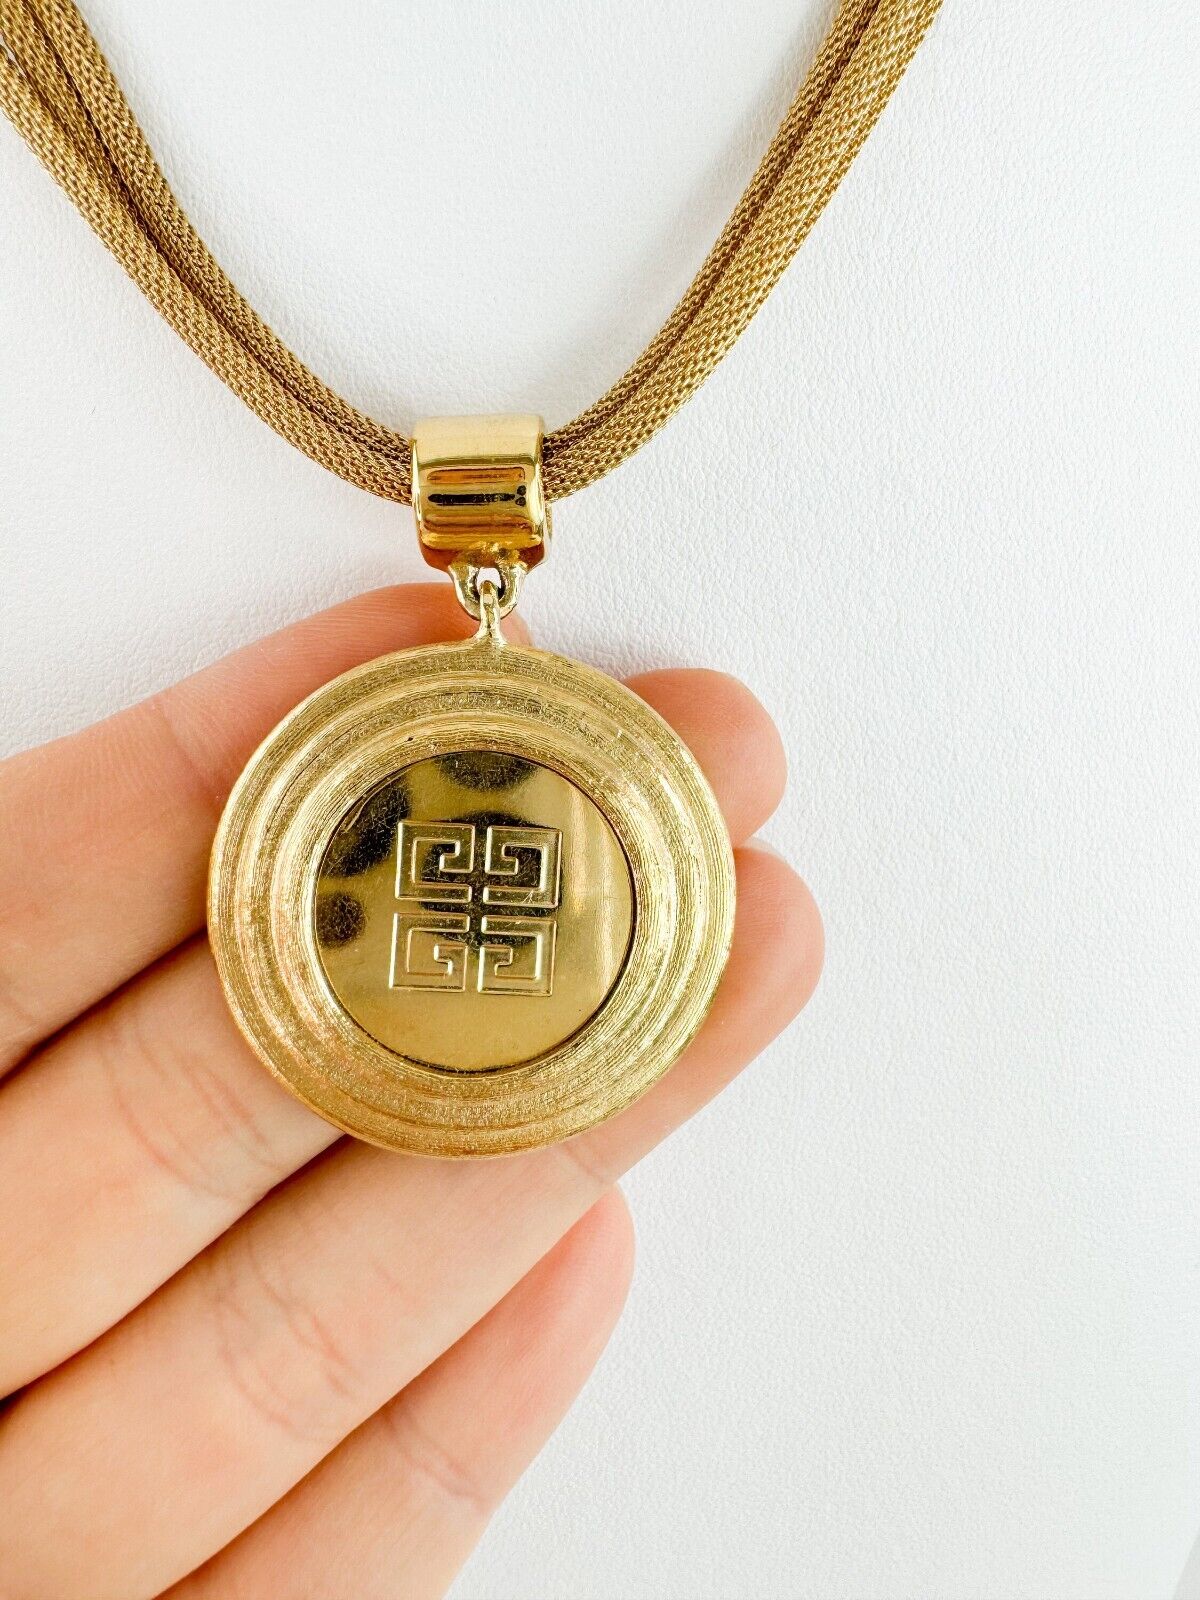 Vintage Givenchy Necklace, Givenchy logo Charm Necklace, Choker Necklace, Chain Necklace, Necklace, Jewelry for Women, Gift for Her